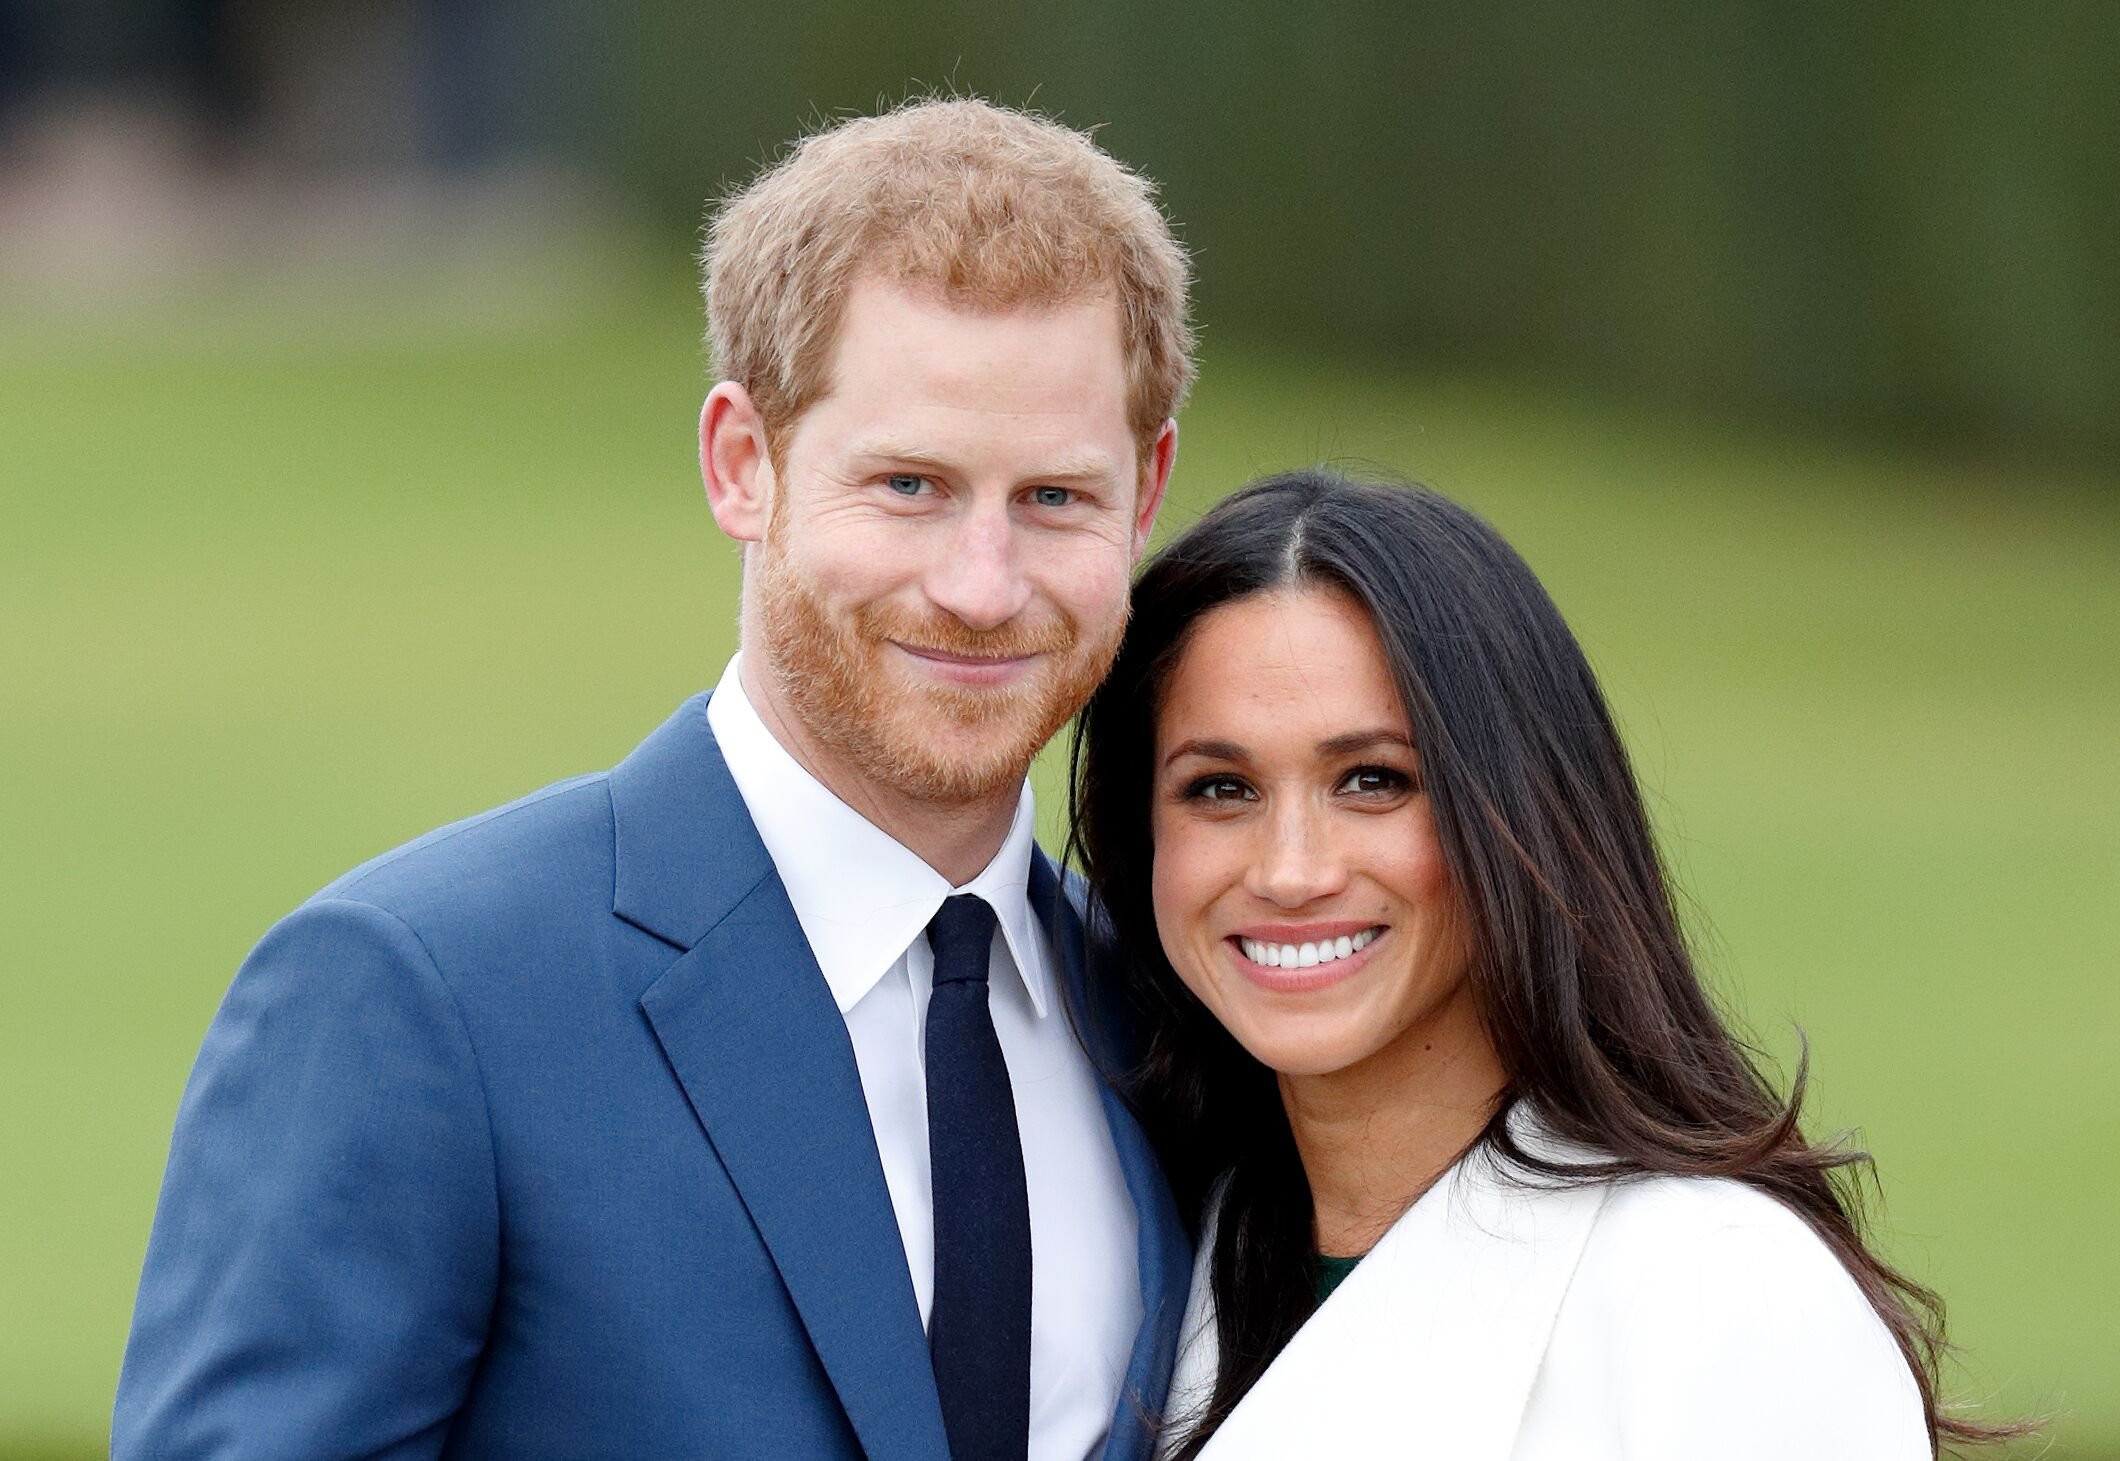 Prince Harry and Meghan Markle attend an official photocall to announce their engagement at The Sunken Gardens, Kensington Palace on November 27, 2017 in London, England. | Source: Getty Images